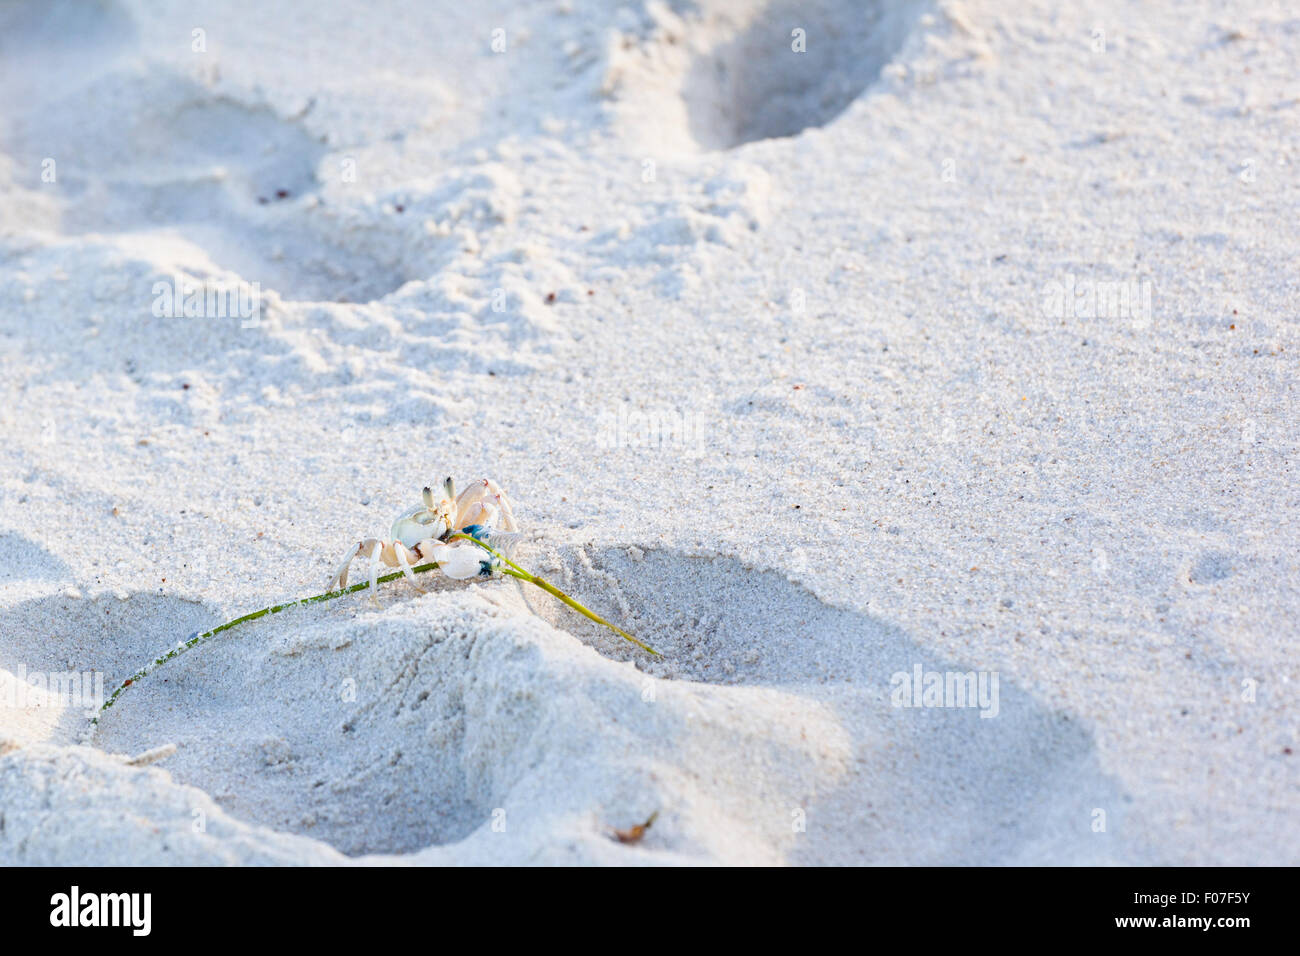 A small crab in the white sand at Diani Beach, Kenya Stock Photo